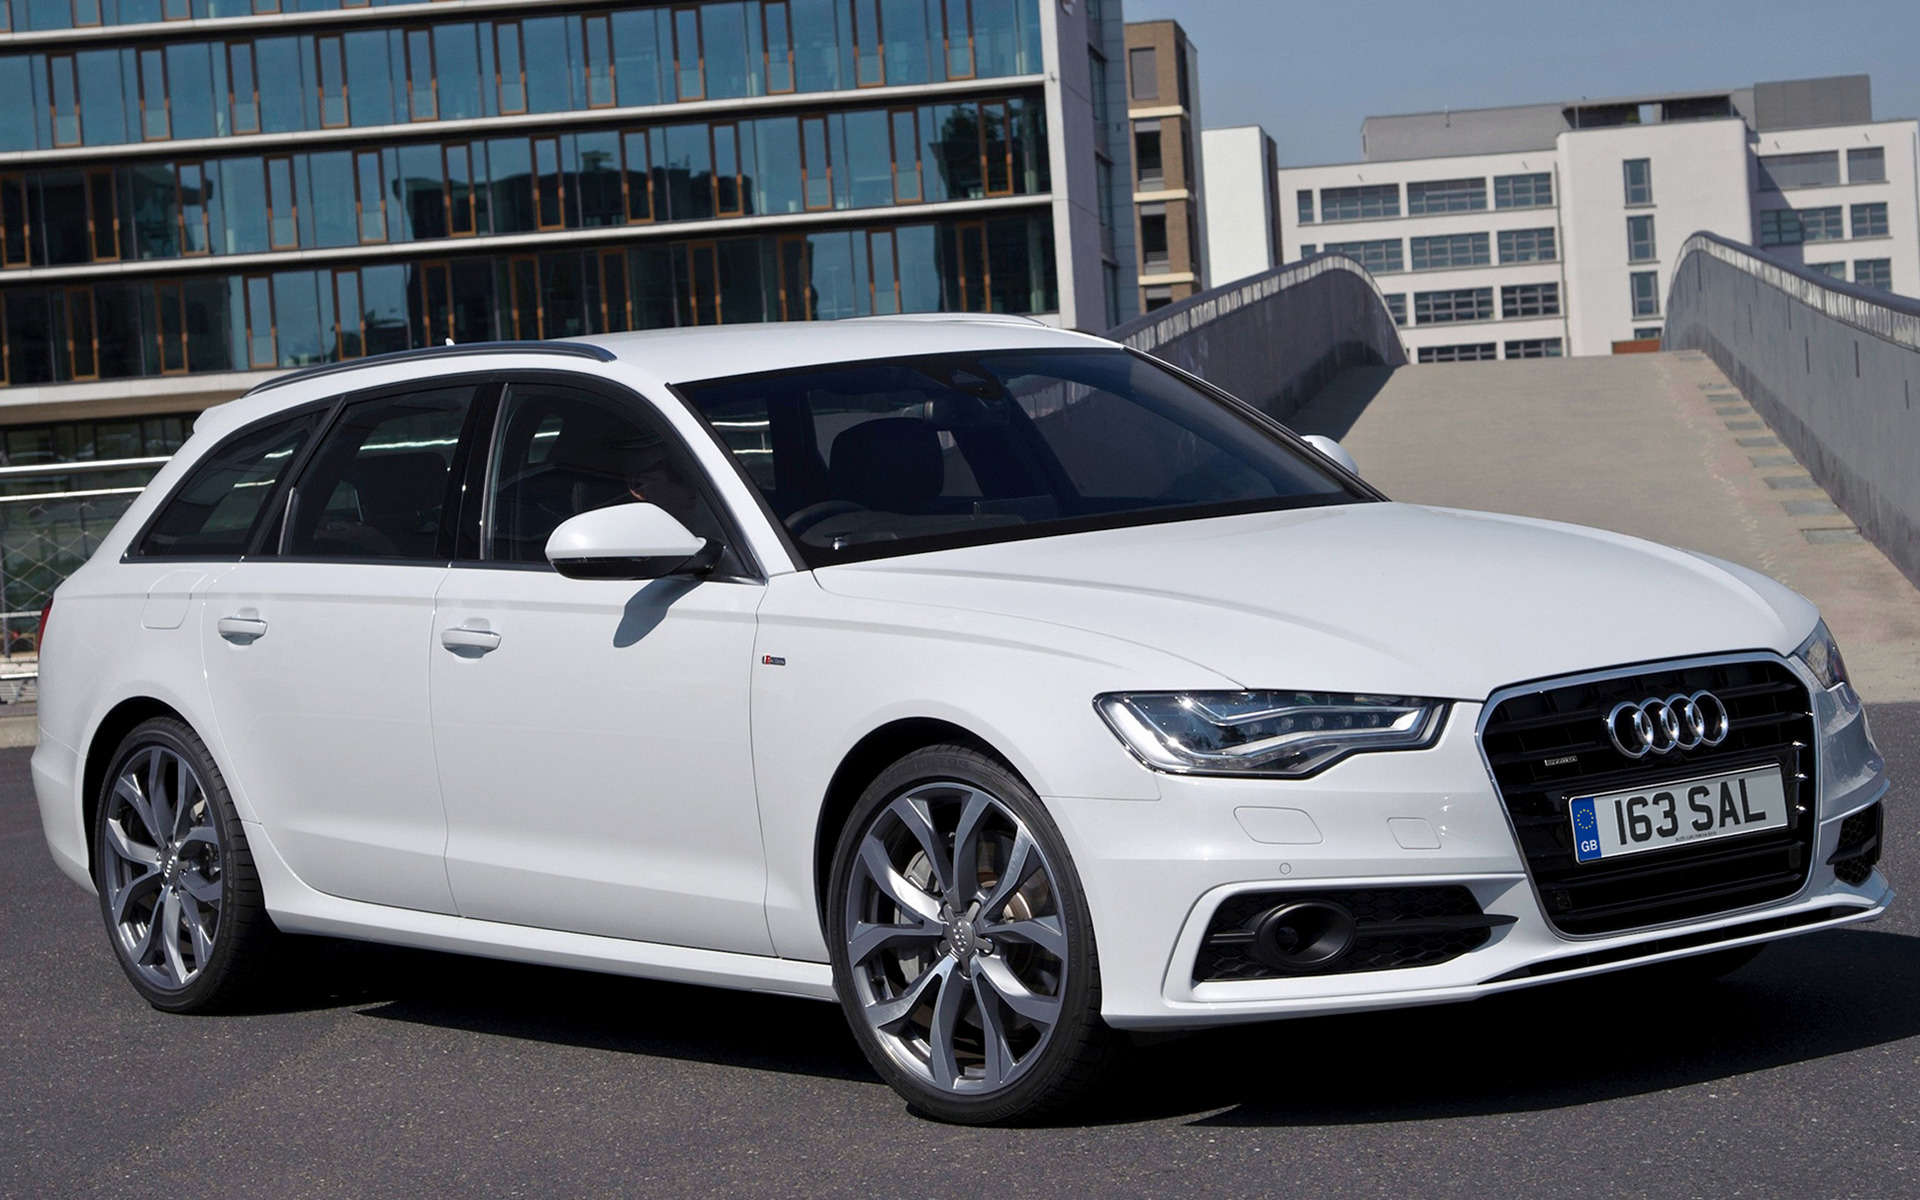 2011 Audi A6 Avant S line (UK) - Wallpapers and HD Images | Pixel